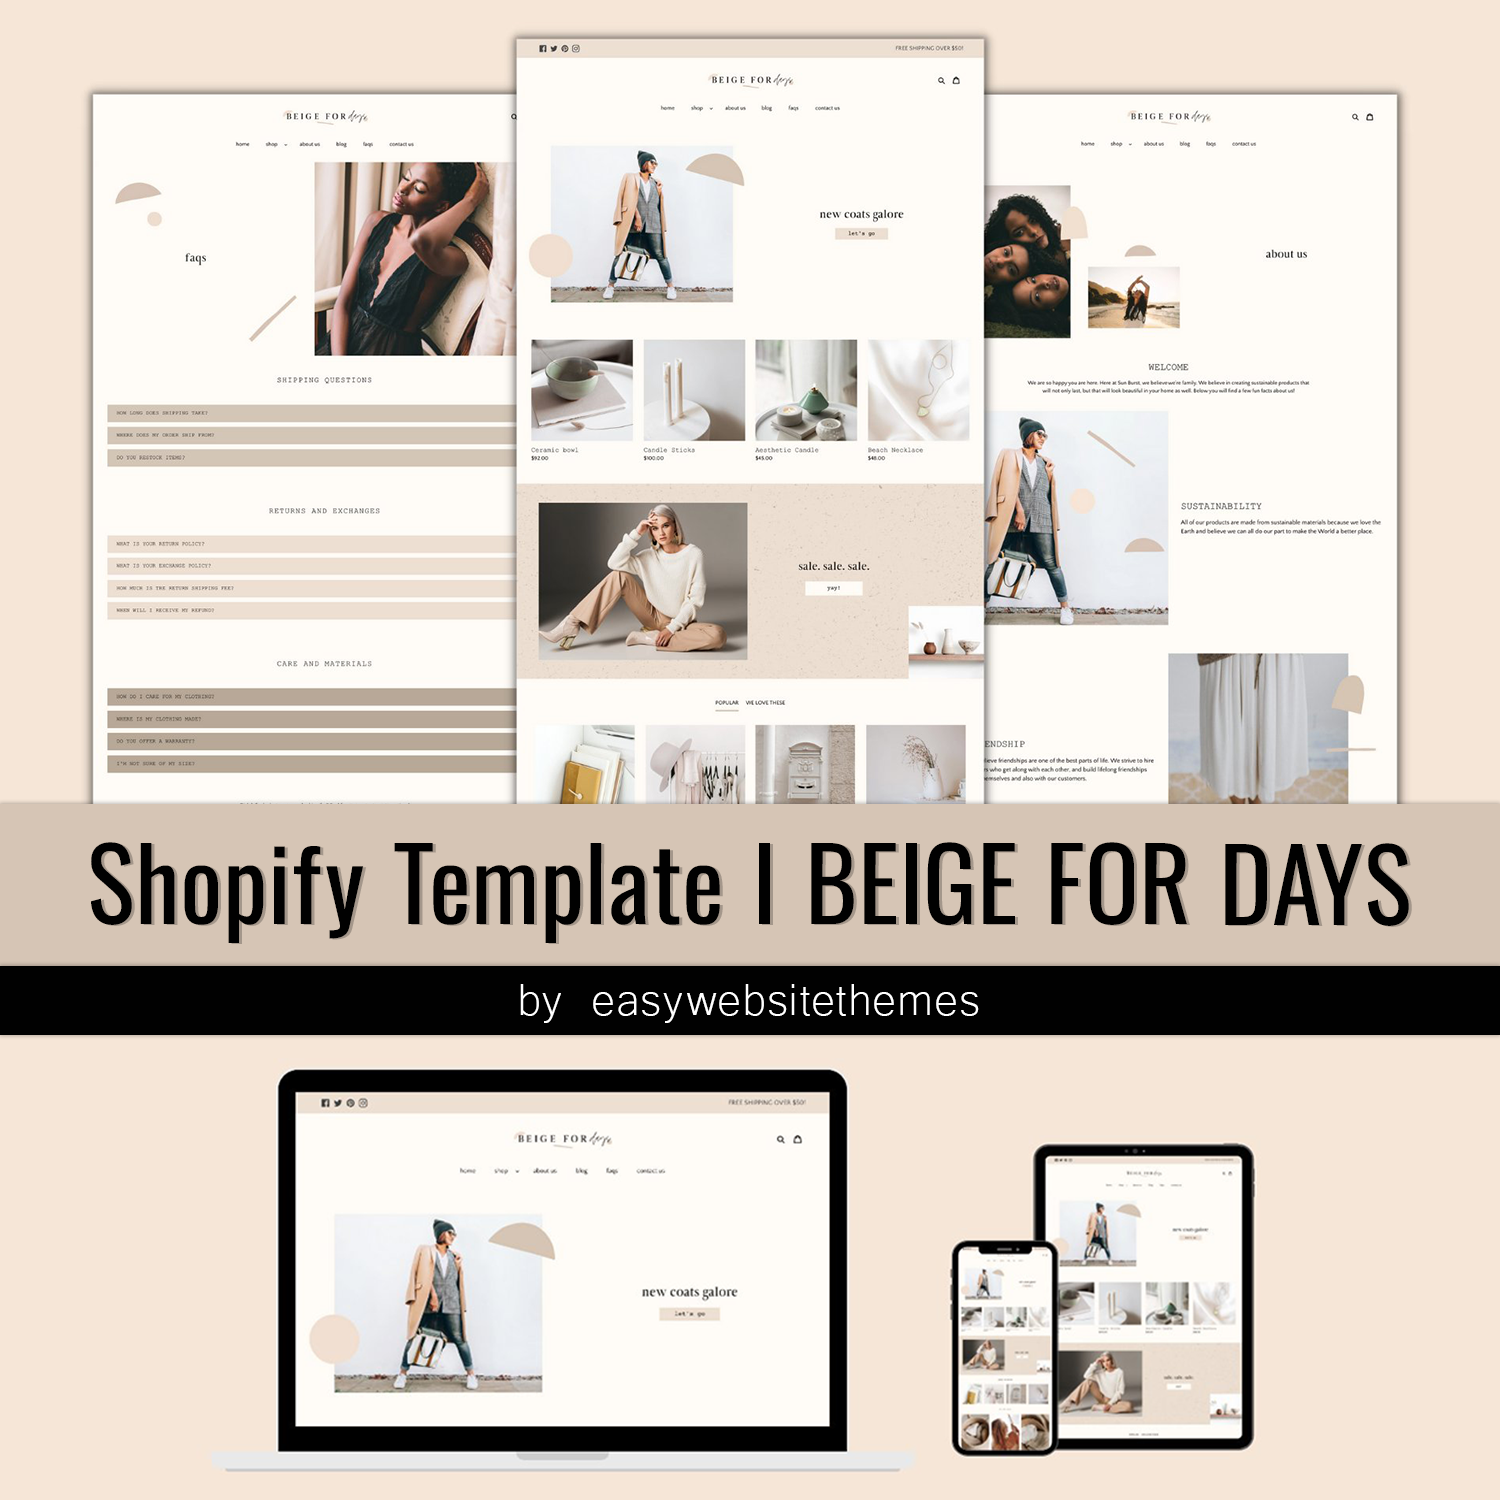 Shopify Template I BEIGE FOR DAYS cover.